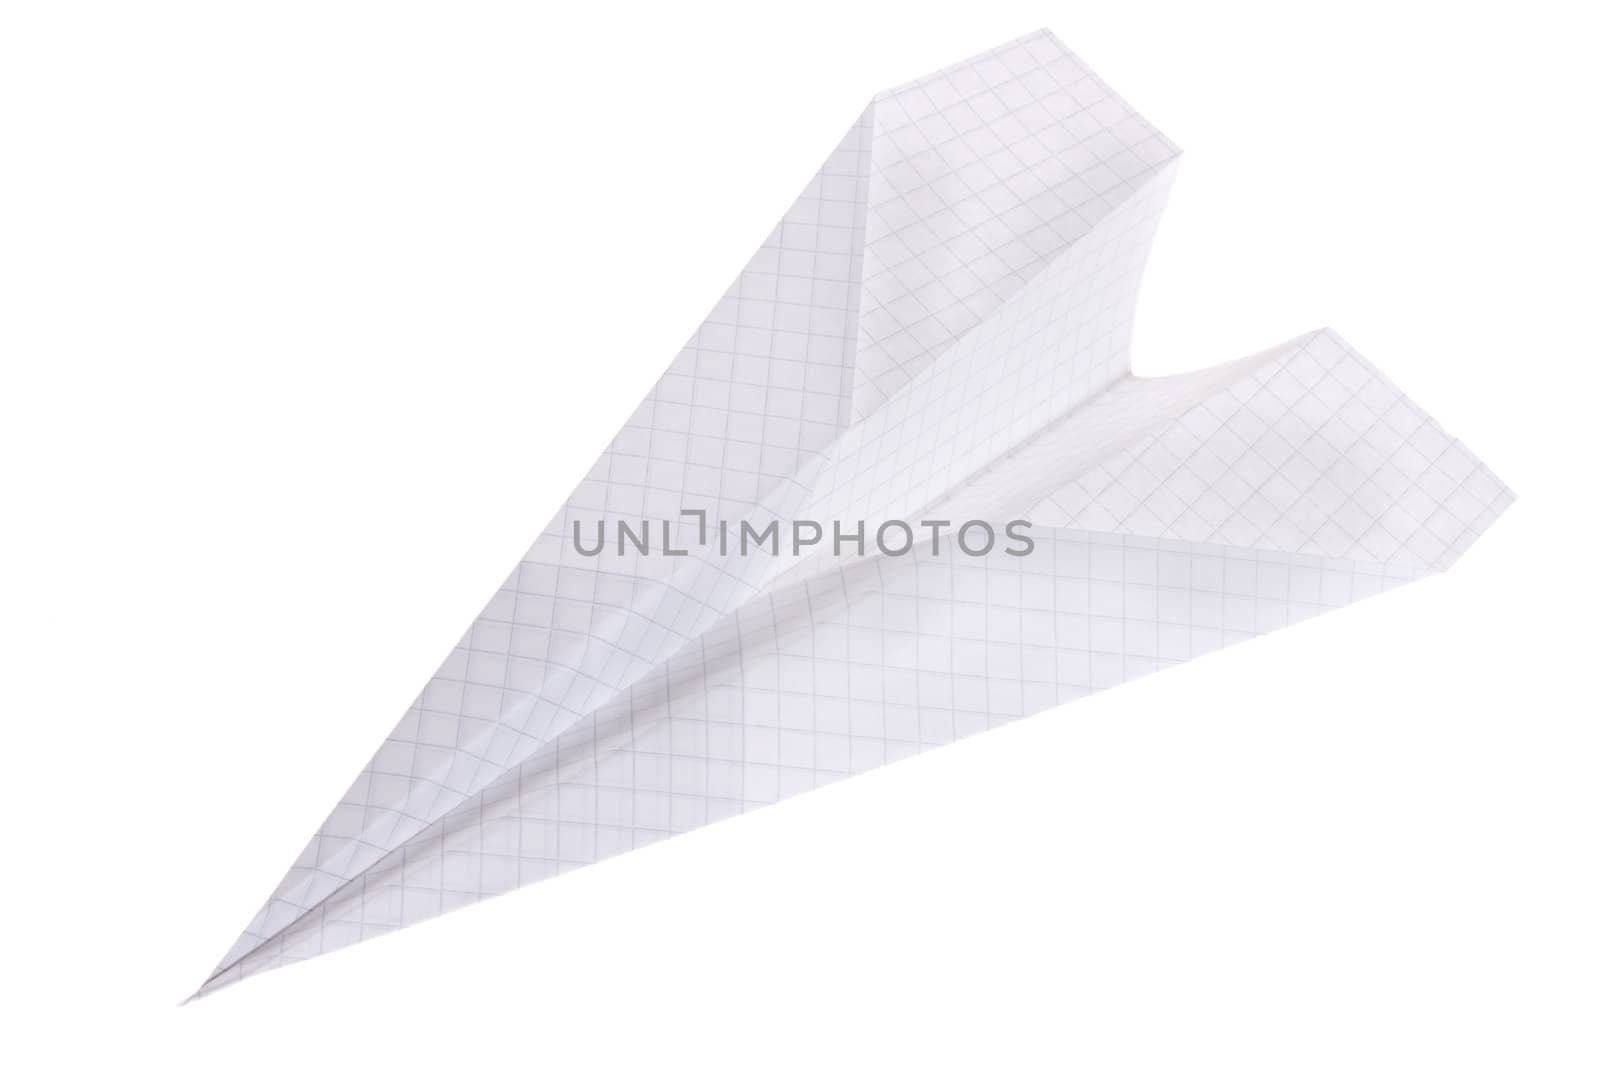 Paper airplane by aguirre_mar